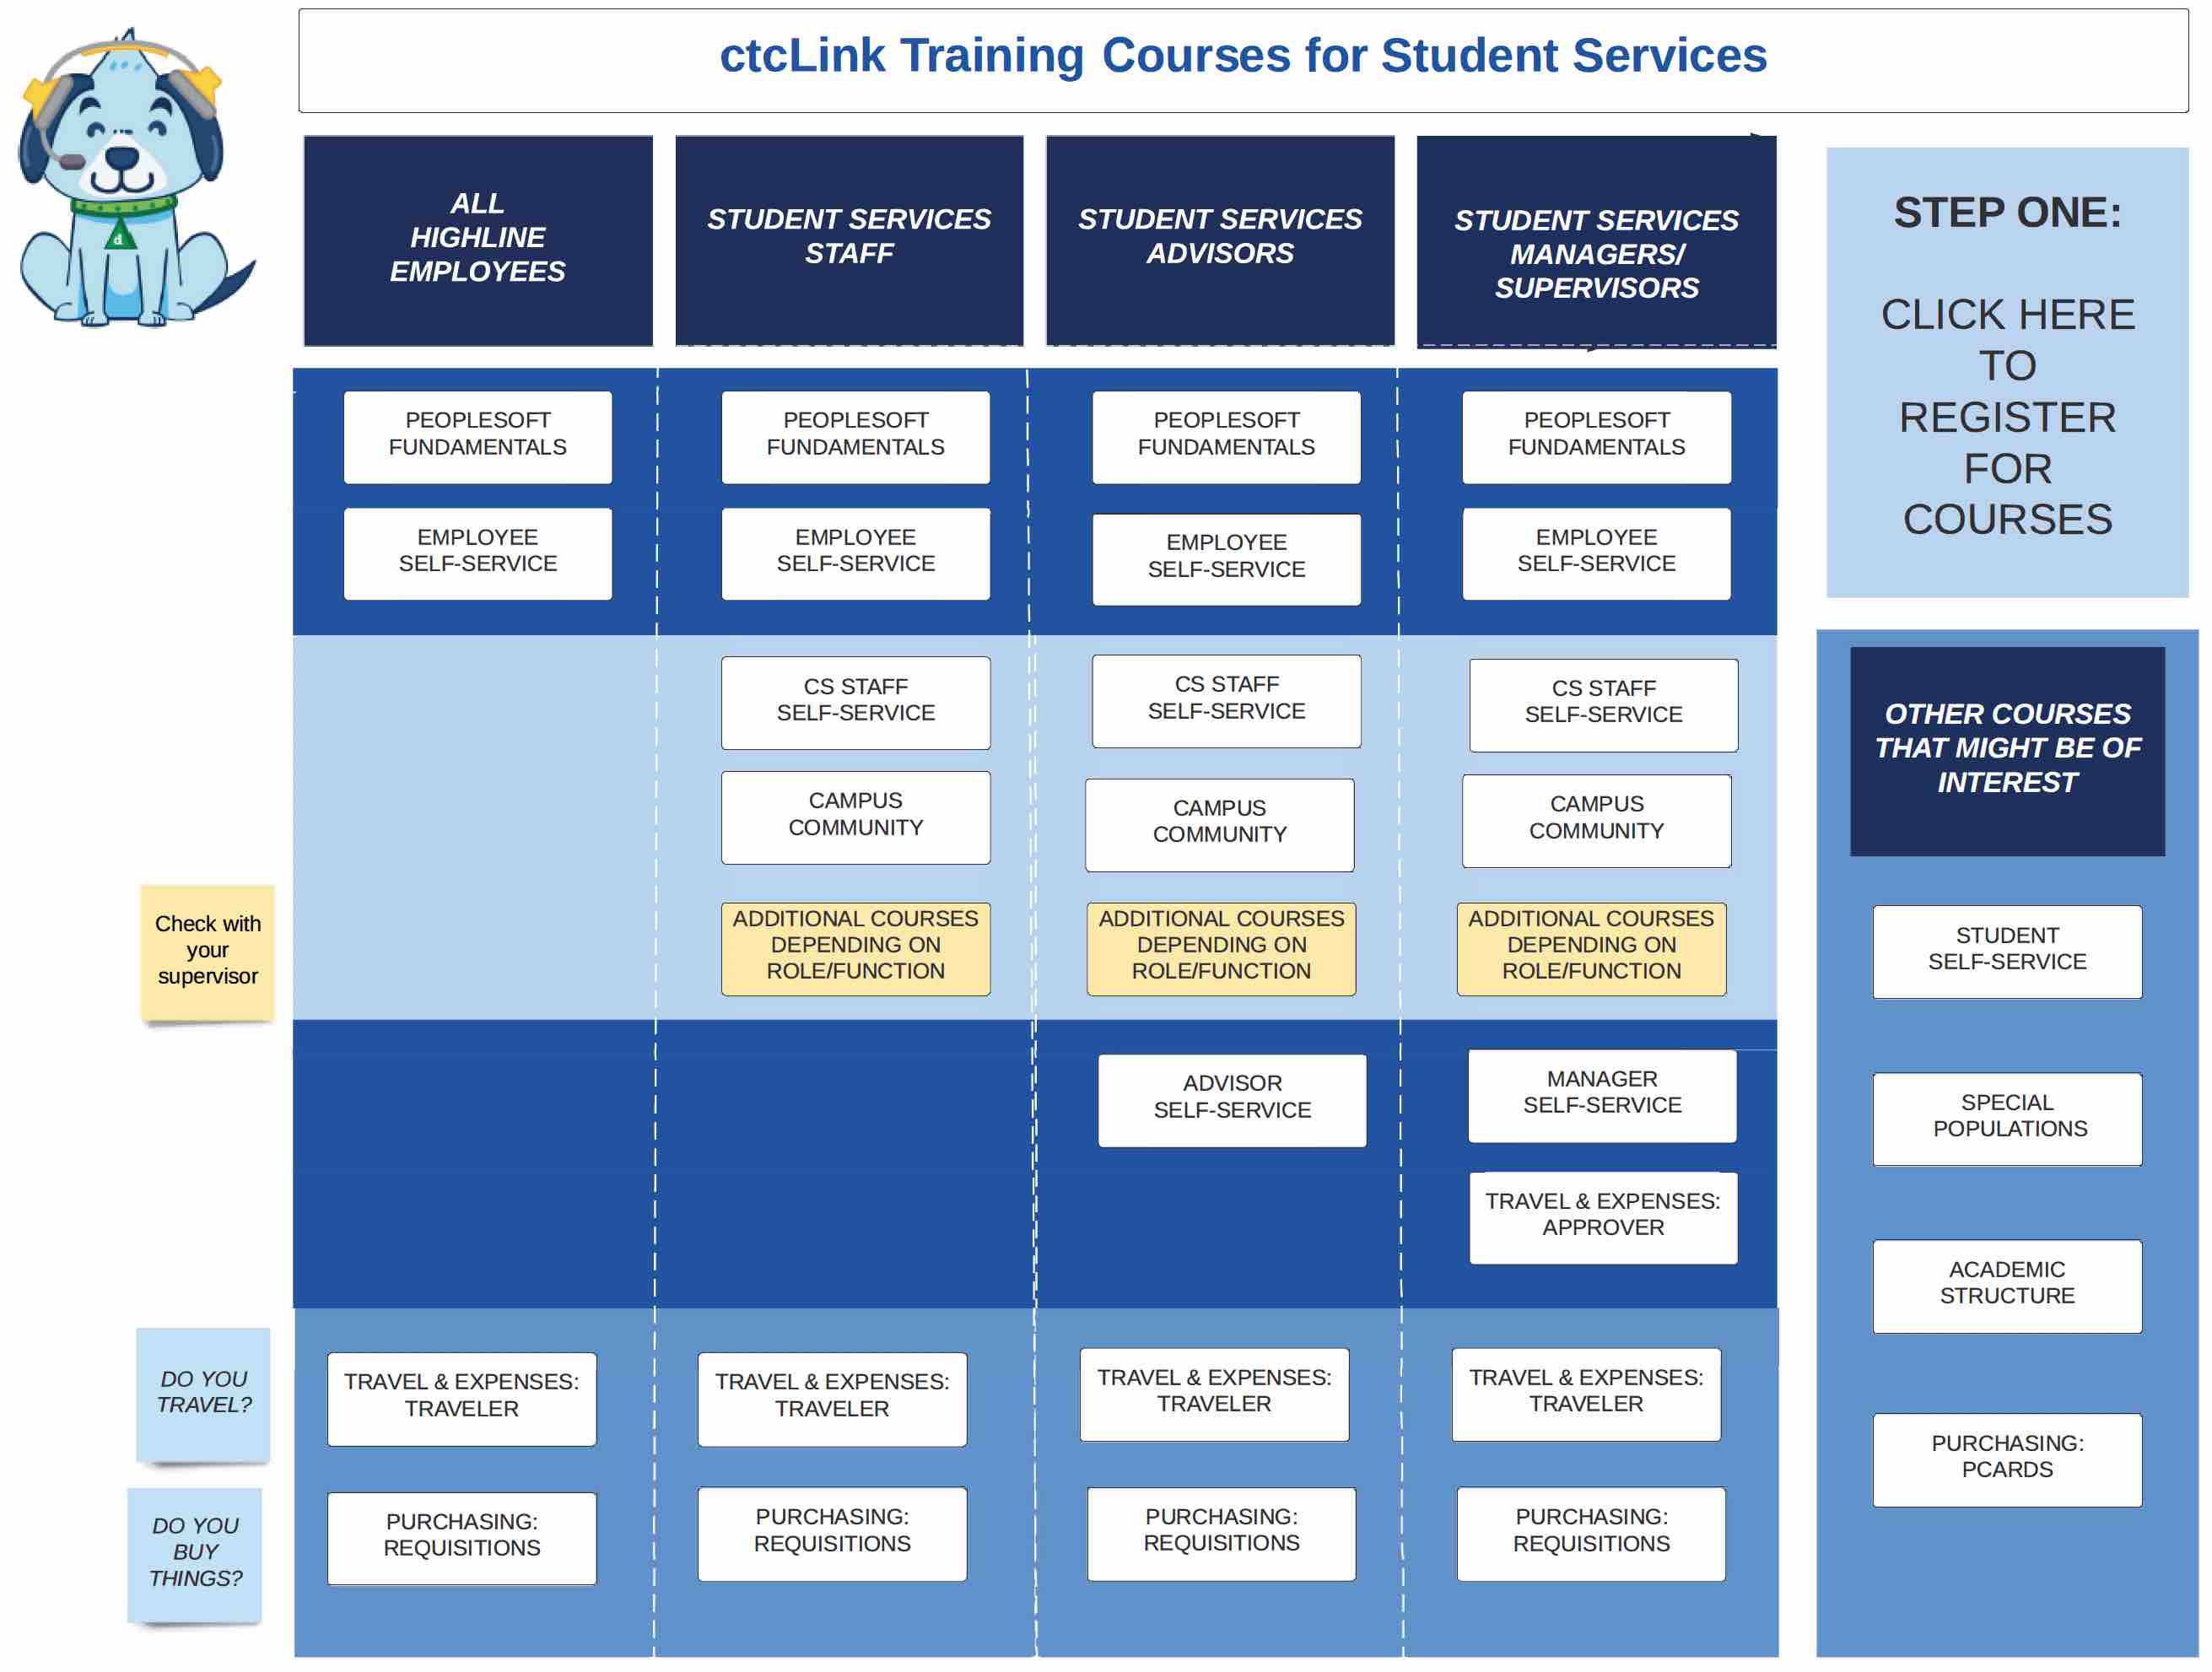 ctcLink Training Courses for Student Services